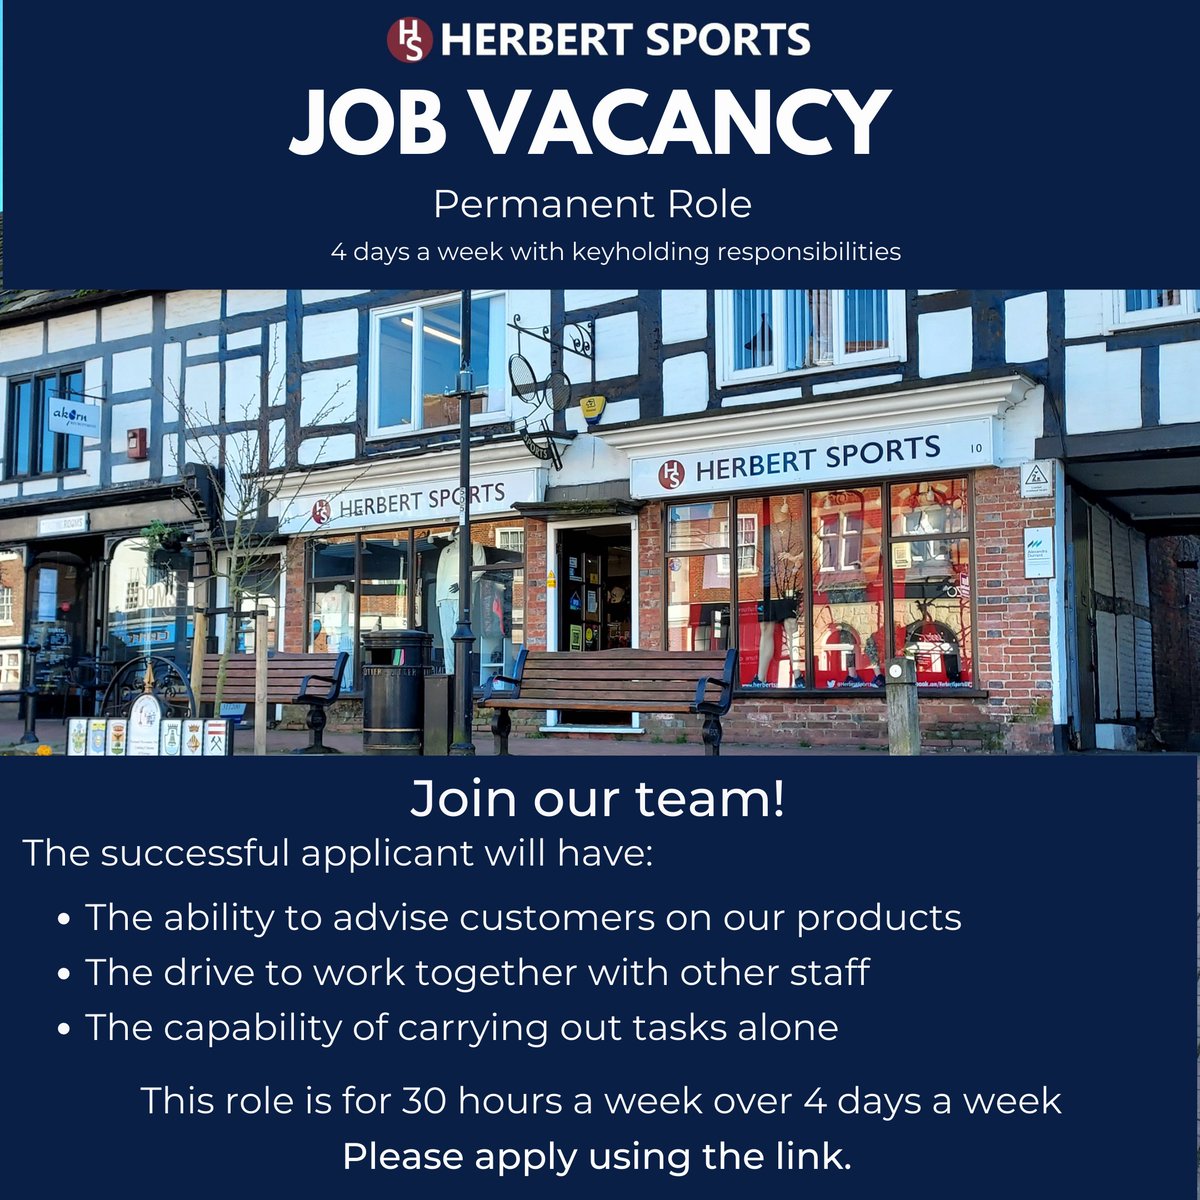 We are hiring! Apply using the link below or email us for more information #eastgrinstead #herbertsports #sussexjobs buff.ly/44WFaqB